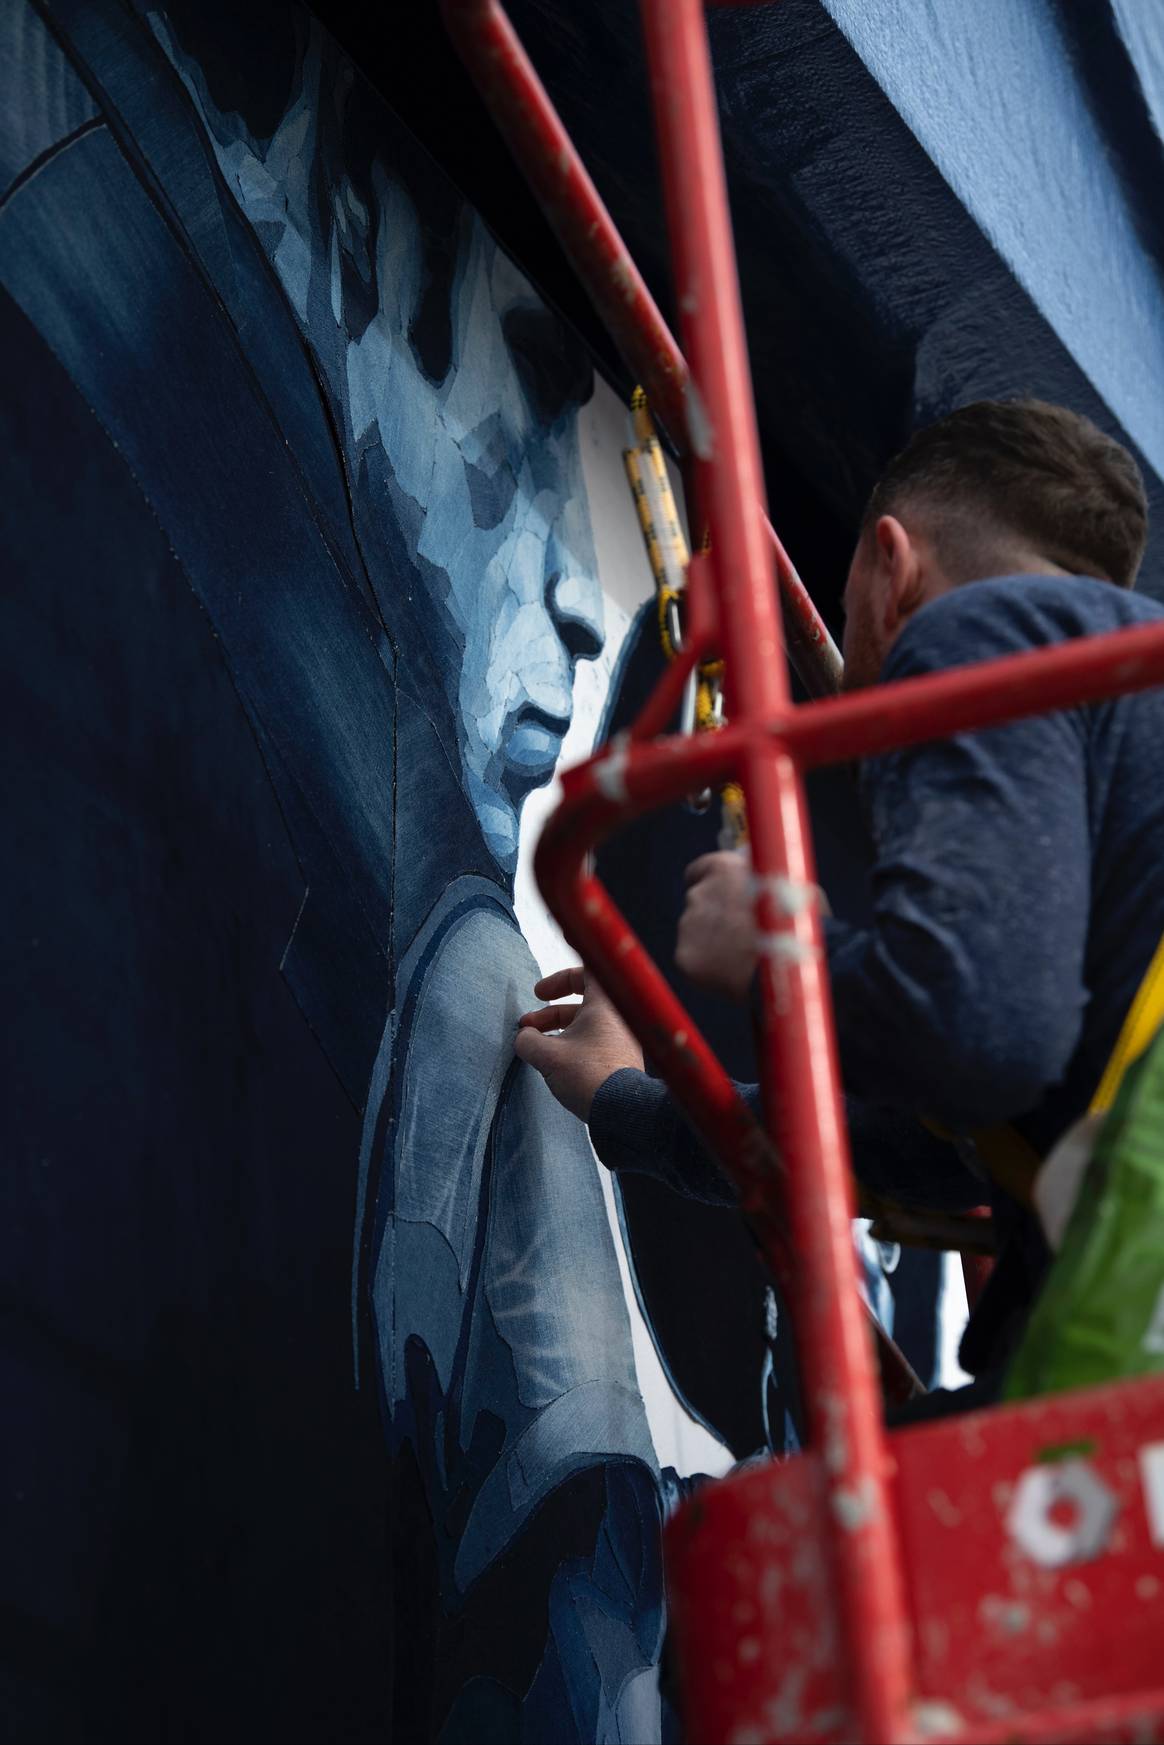 Ian Berry finishing a detail of the mural in Paris. Image: Kristy Sparow